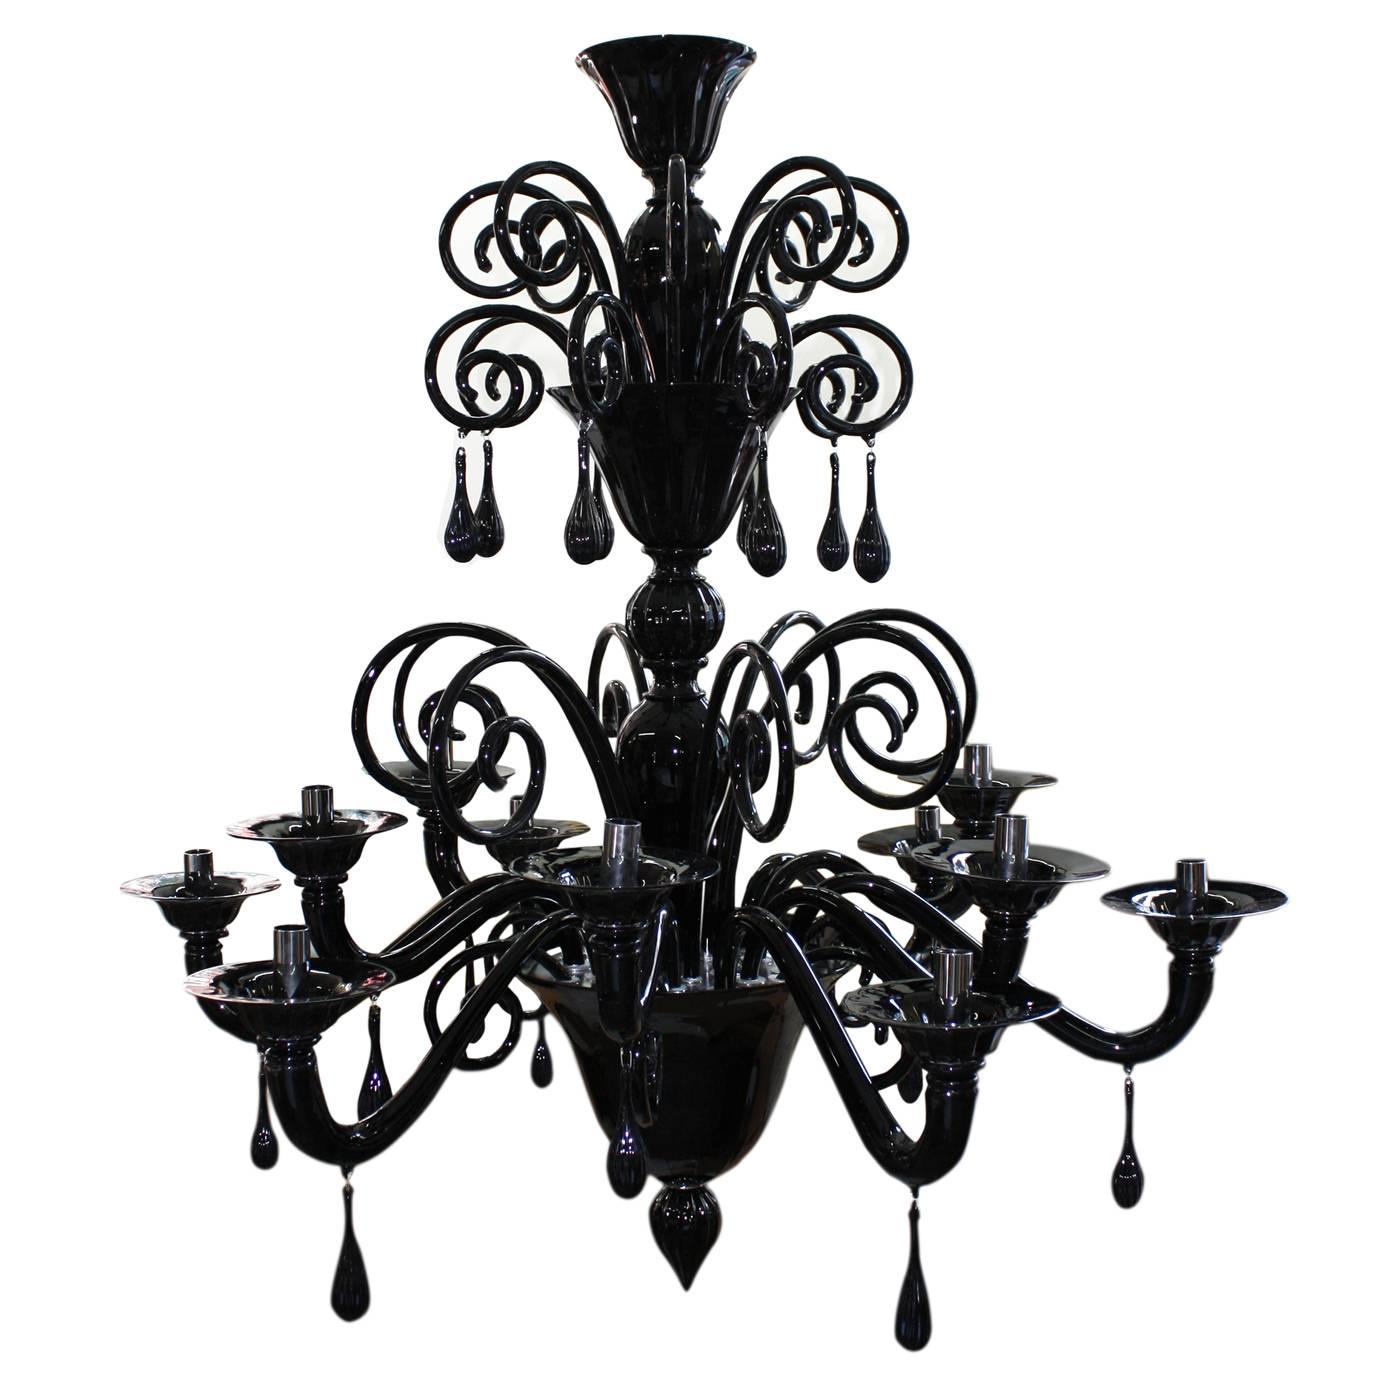 This majestic chandelier has twelve lights and can feature two or three tiers of lights. Each tier is decorated at the top with a series of curls with pendants. The same pendants adorn also the curve of each arm.